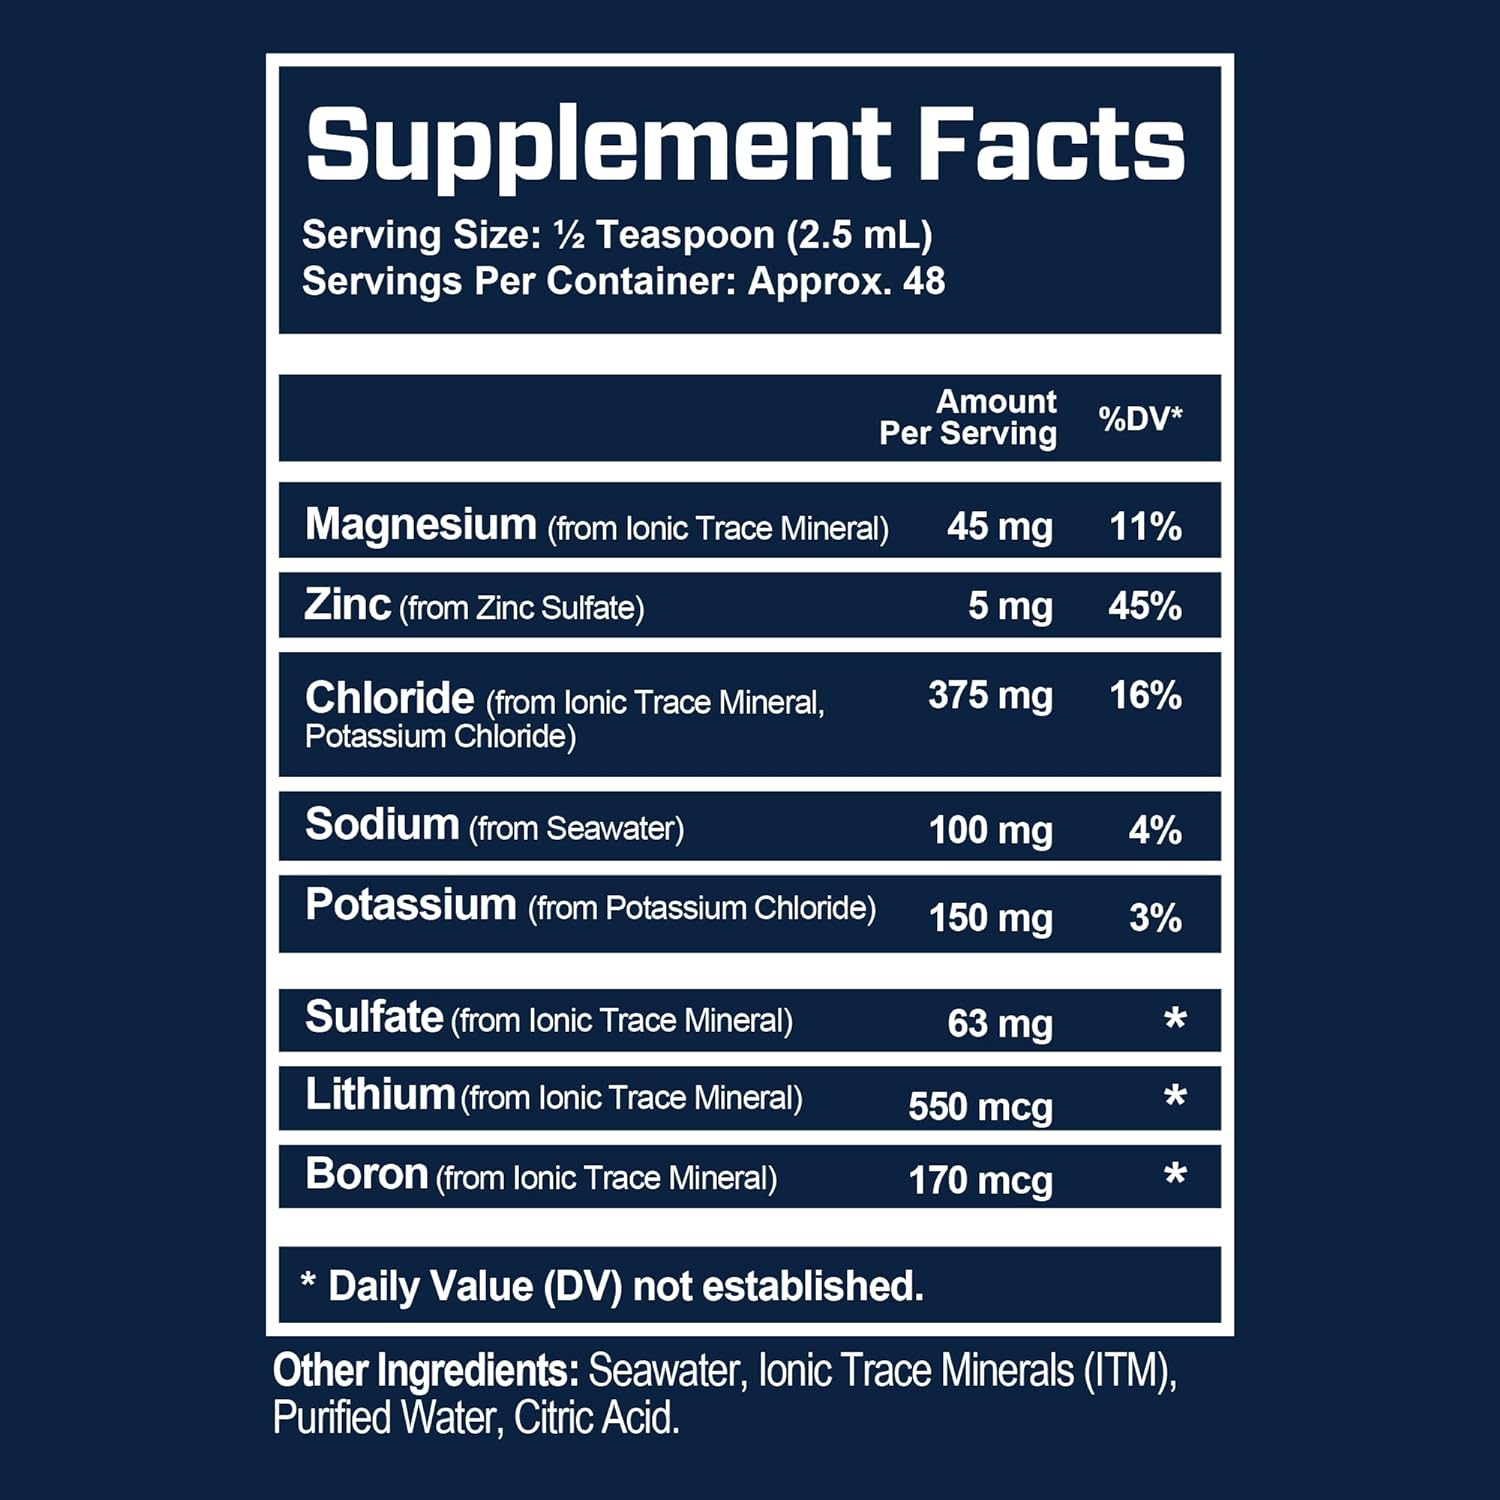 supplement facts of Unflavored Liquid Electrolyte Drops